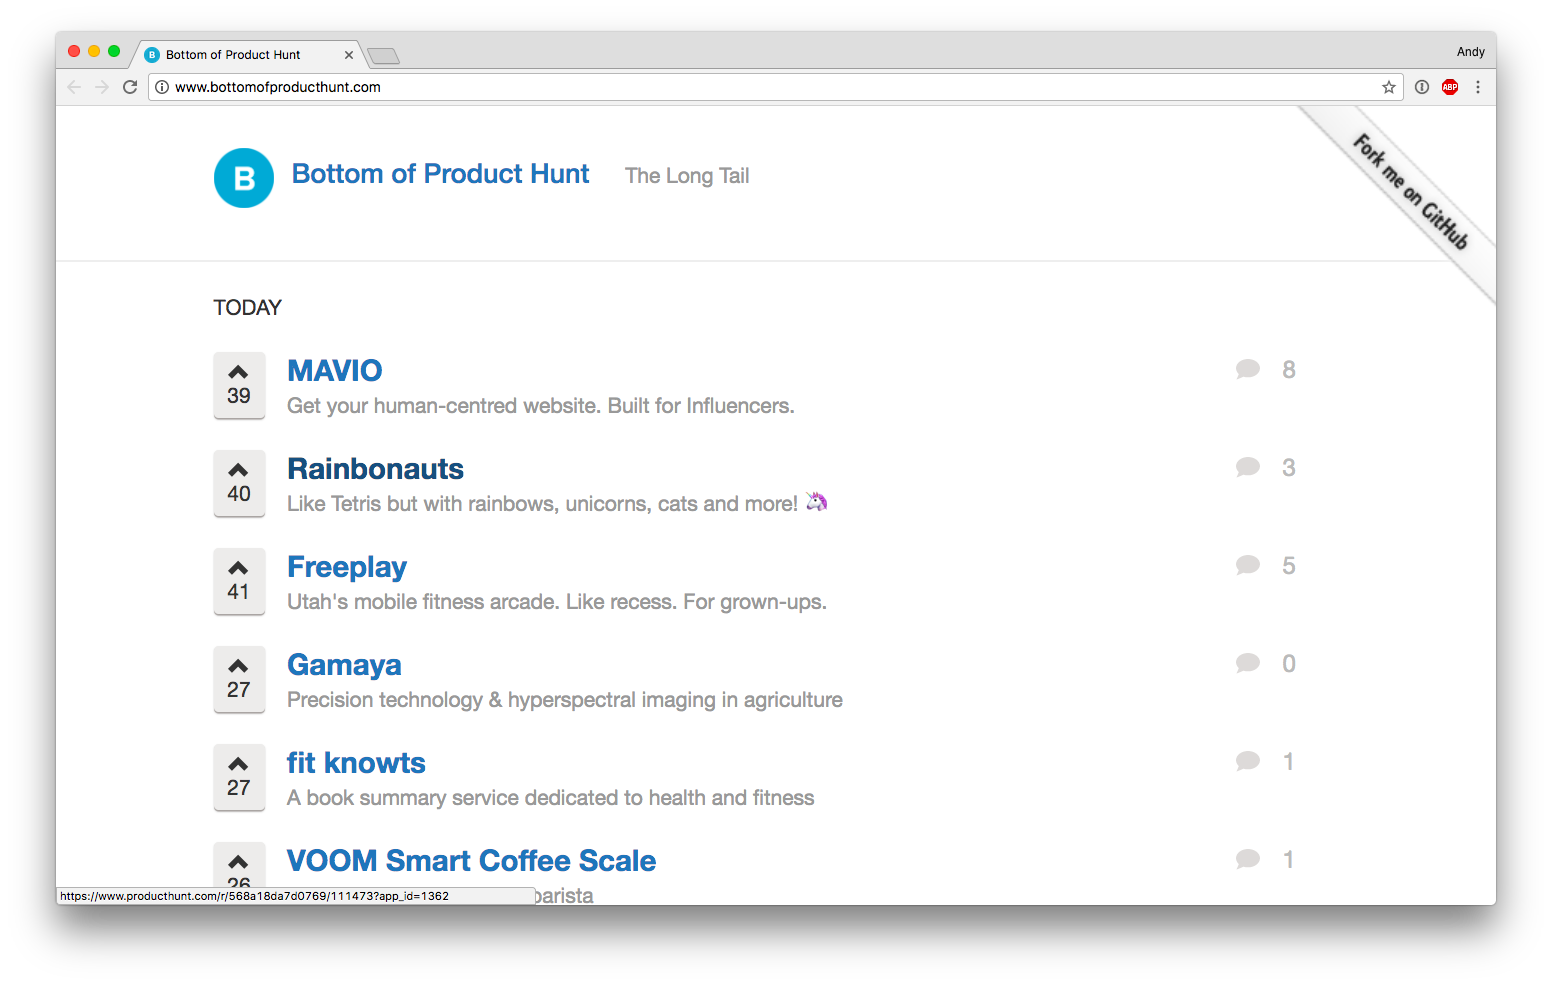 Bottom of Product Hunt homepage.